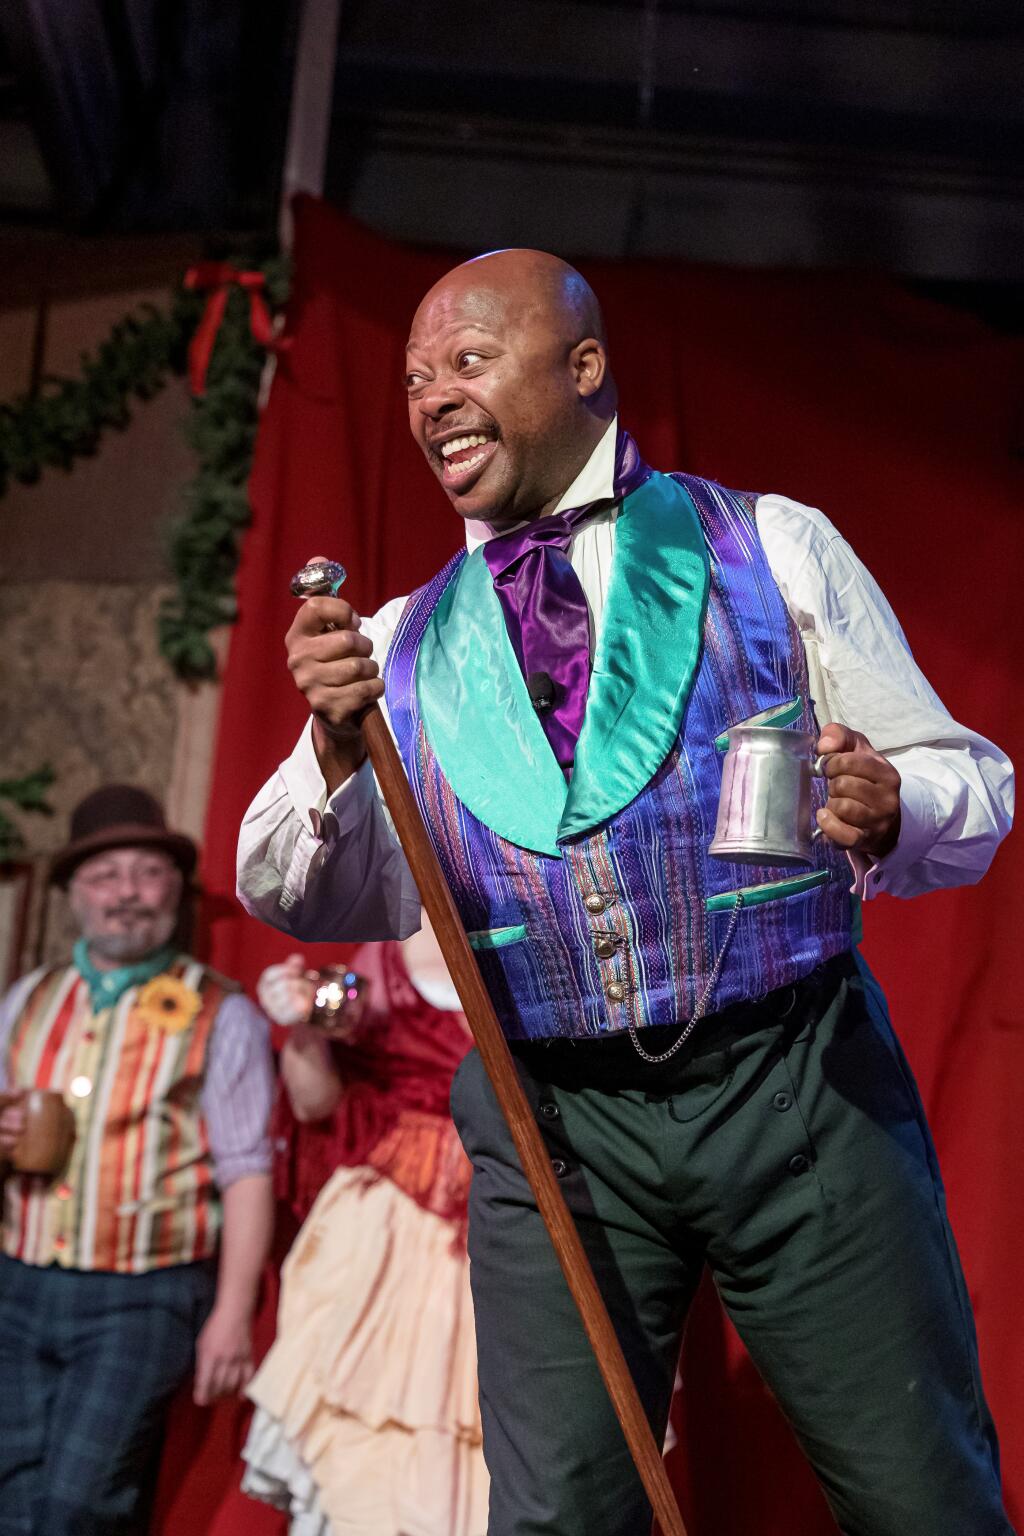 Brian Yates Sharber in a show at Mad Sal’s at the Dickens Fair. (Phot by Robin Fadtke)